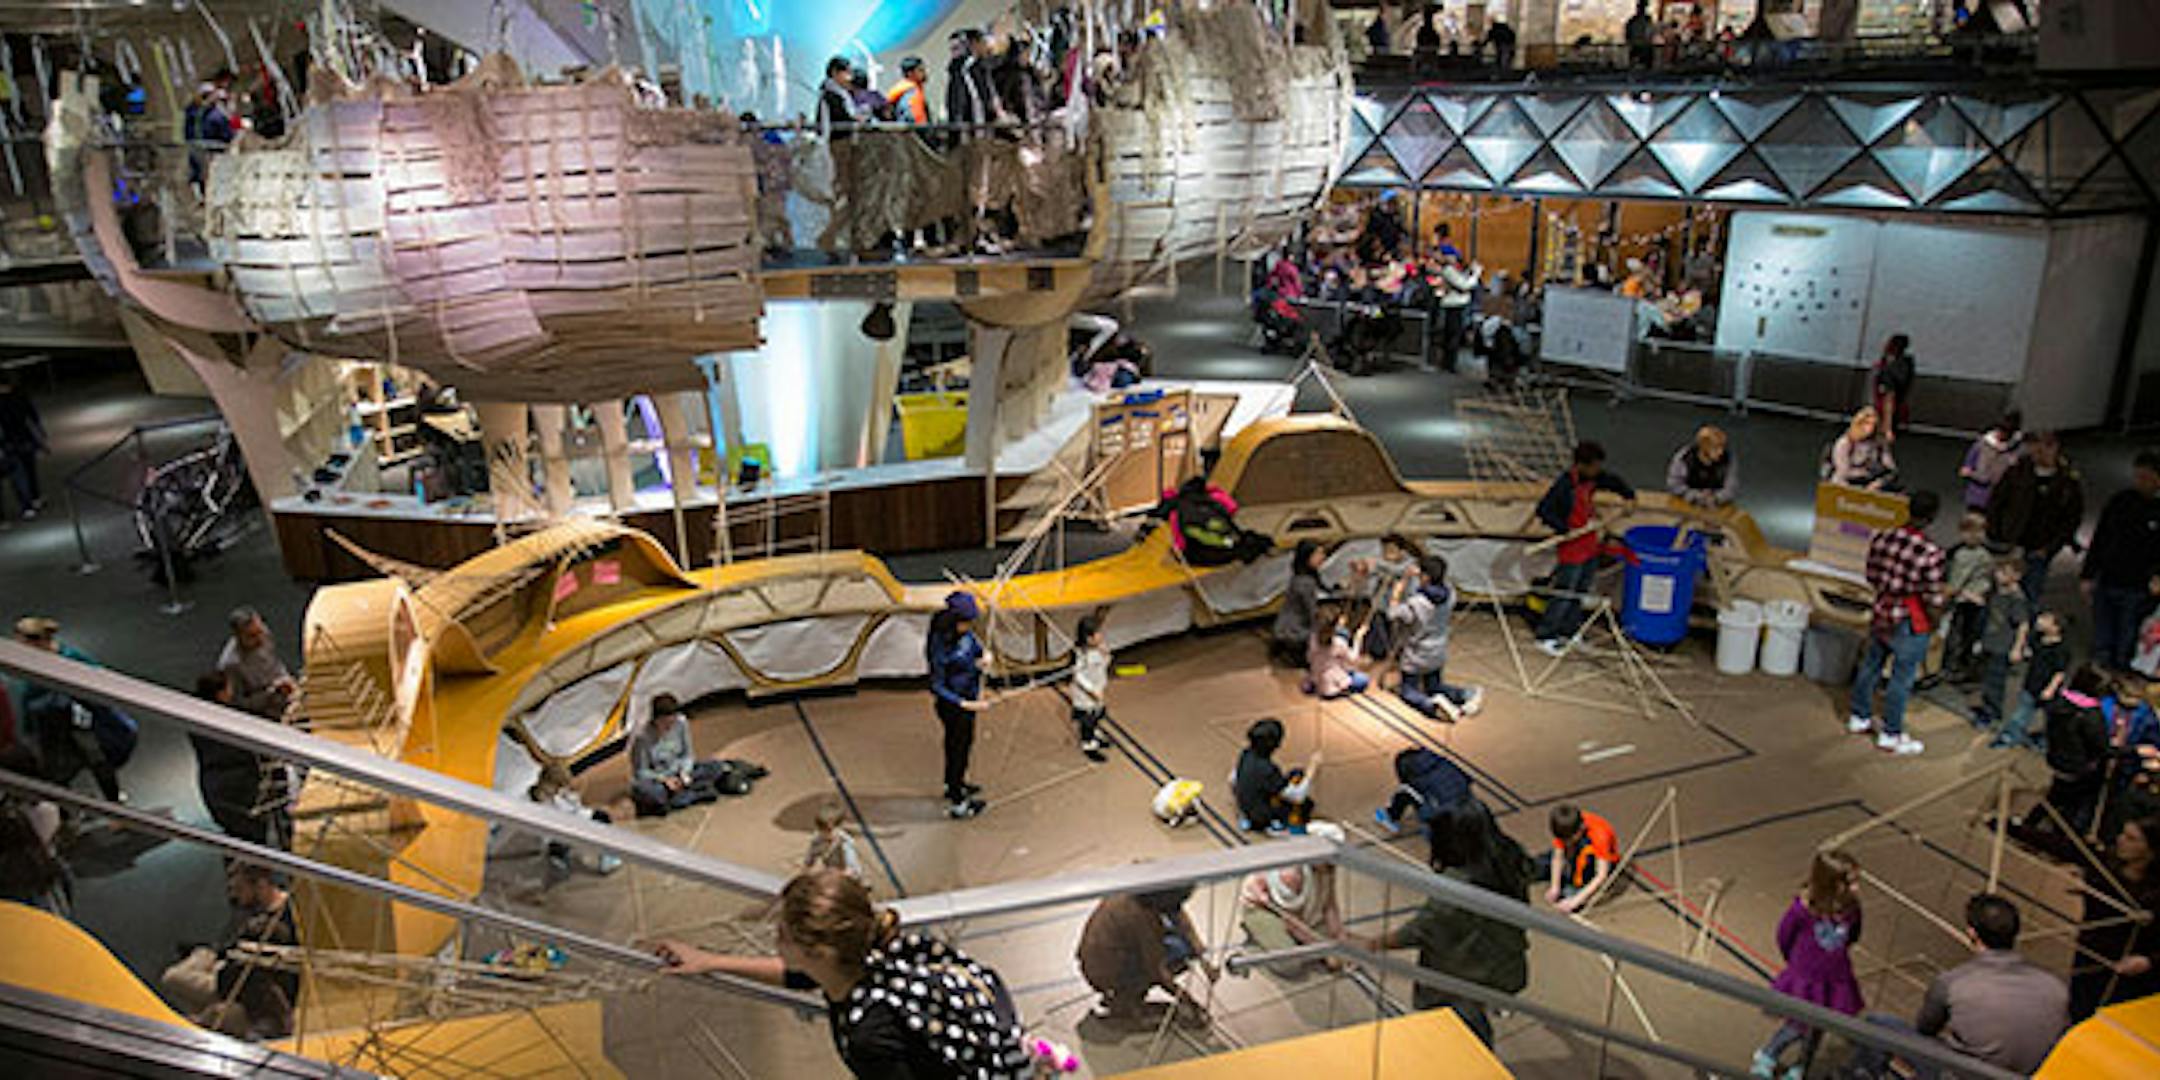 importance of science museum in education